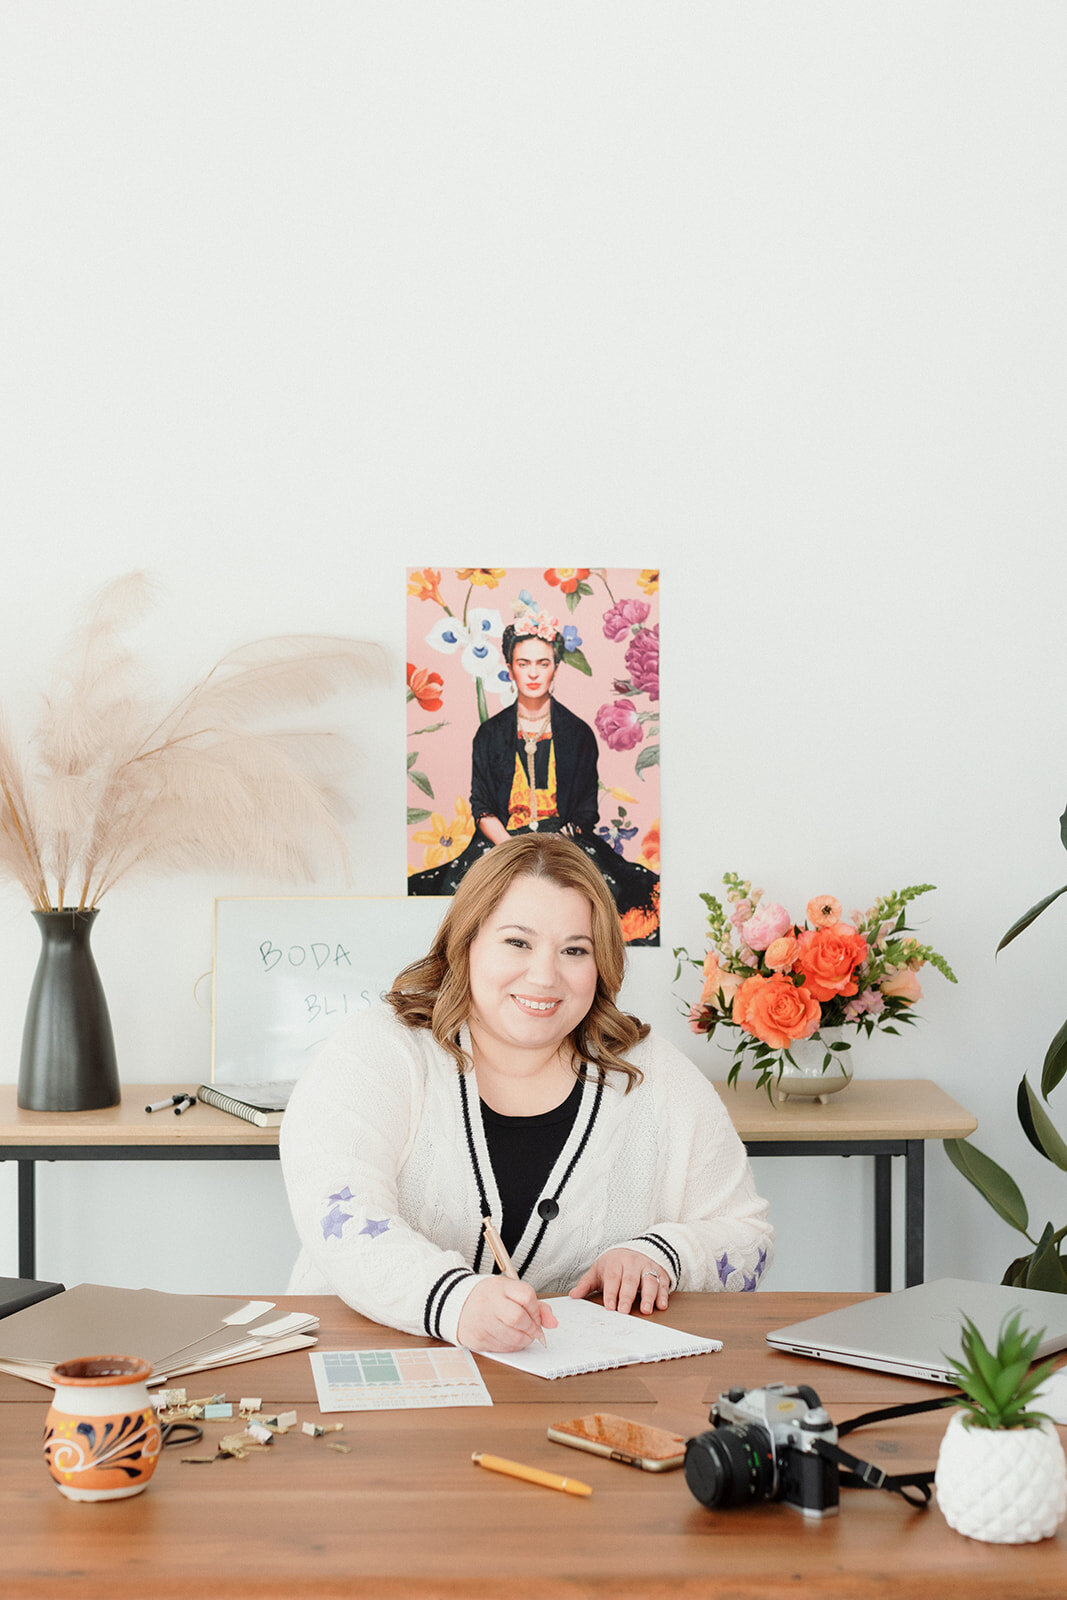 casual business owner sitting at her desk and filling out papers while smiling with Frida Kahlo poster behind her